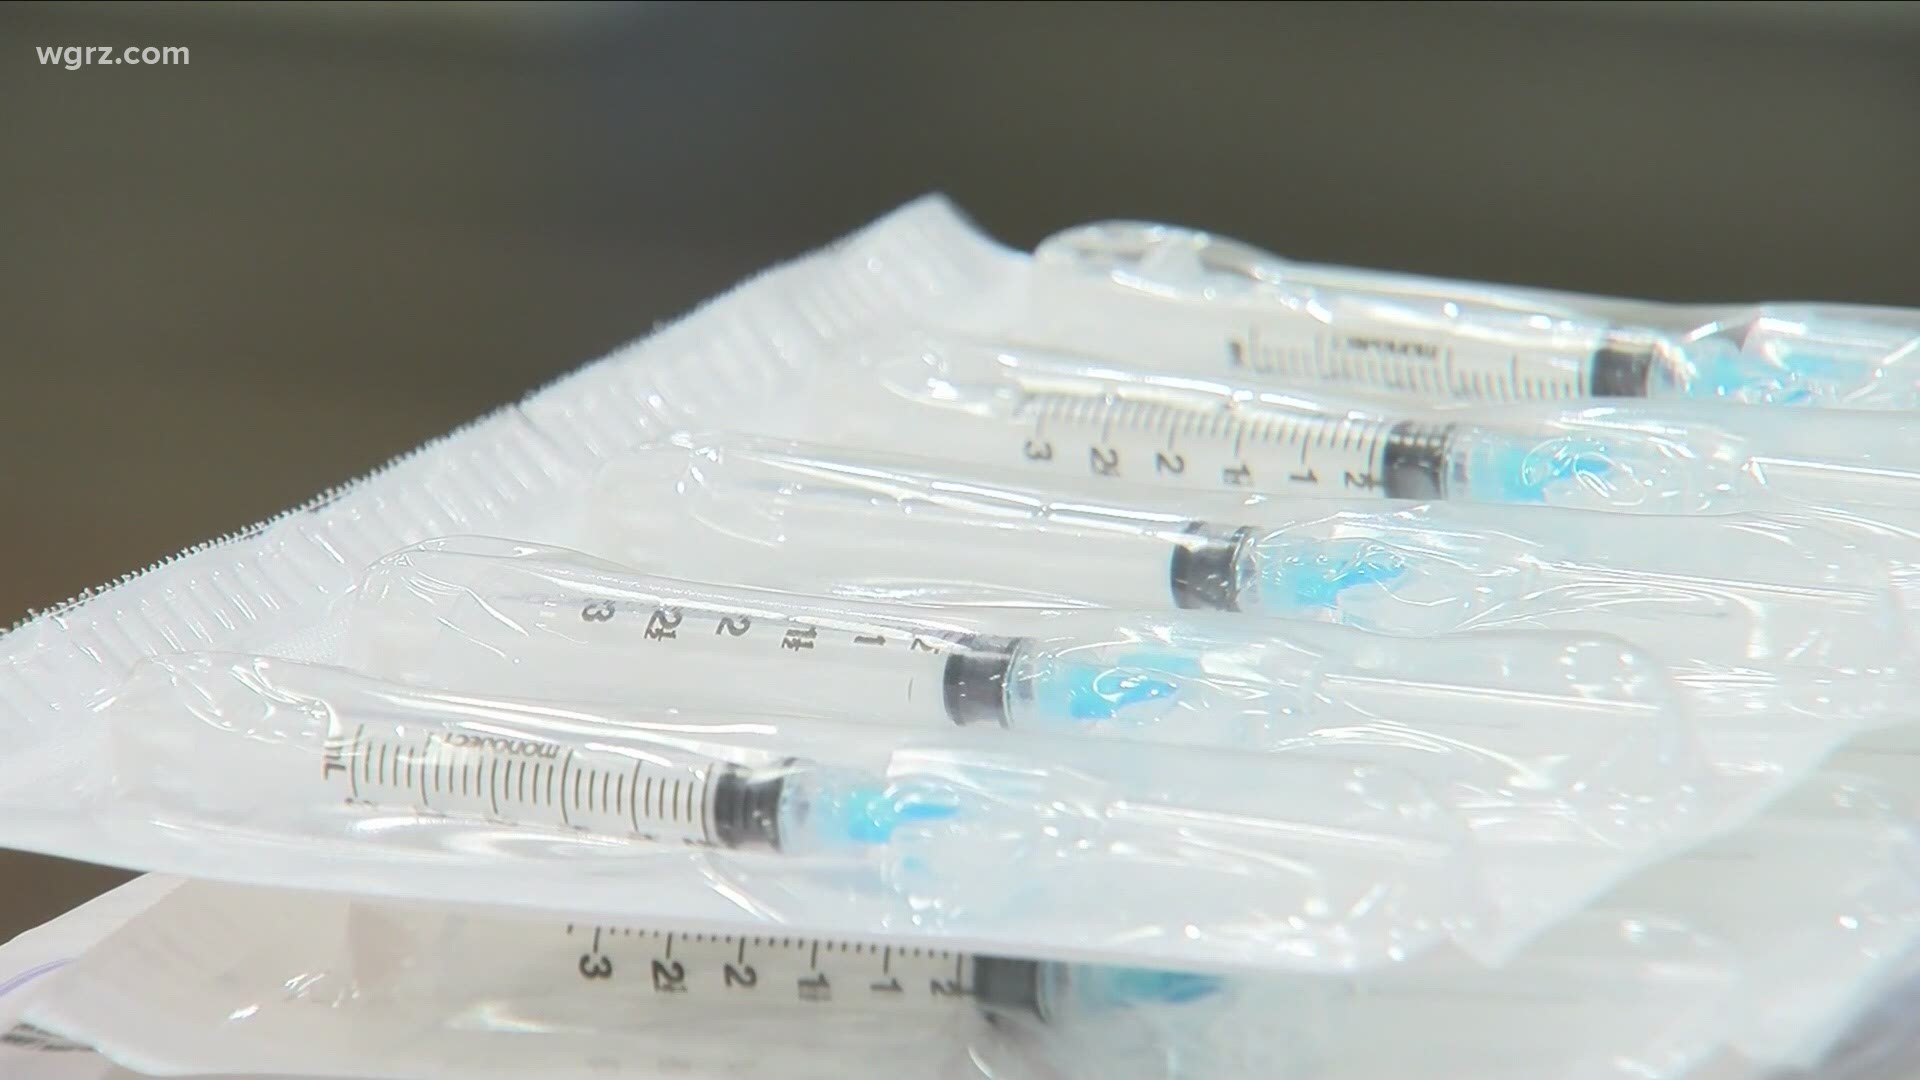 C-V-S announced that it's adding 16 more locations across upstate New York where vaccinations opened today